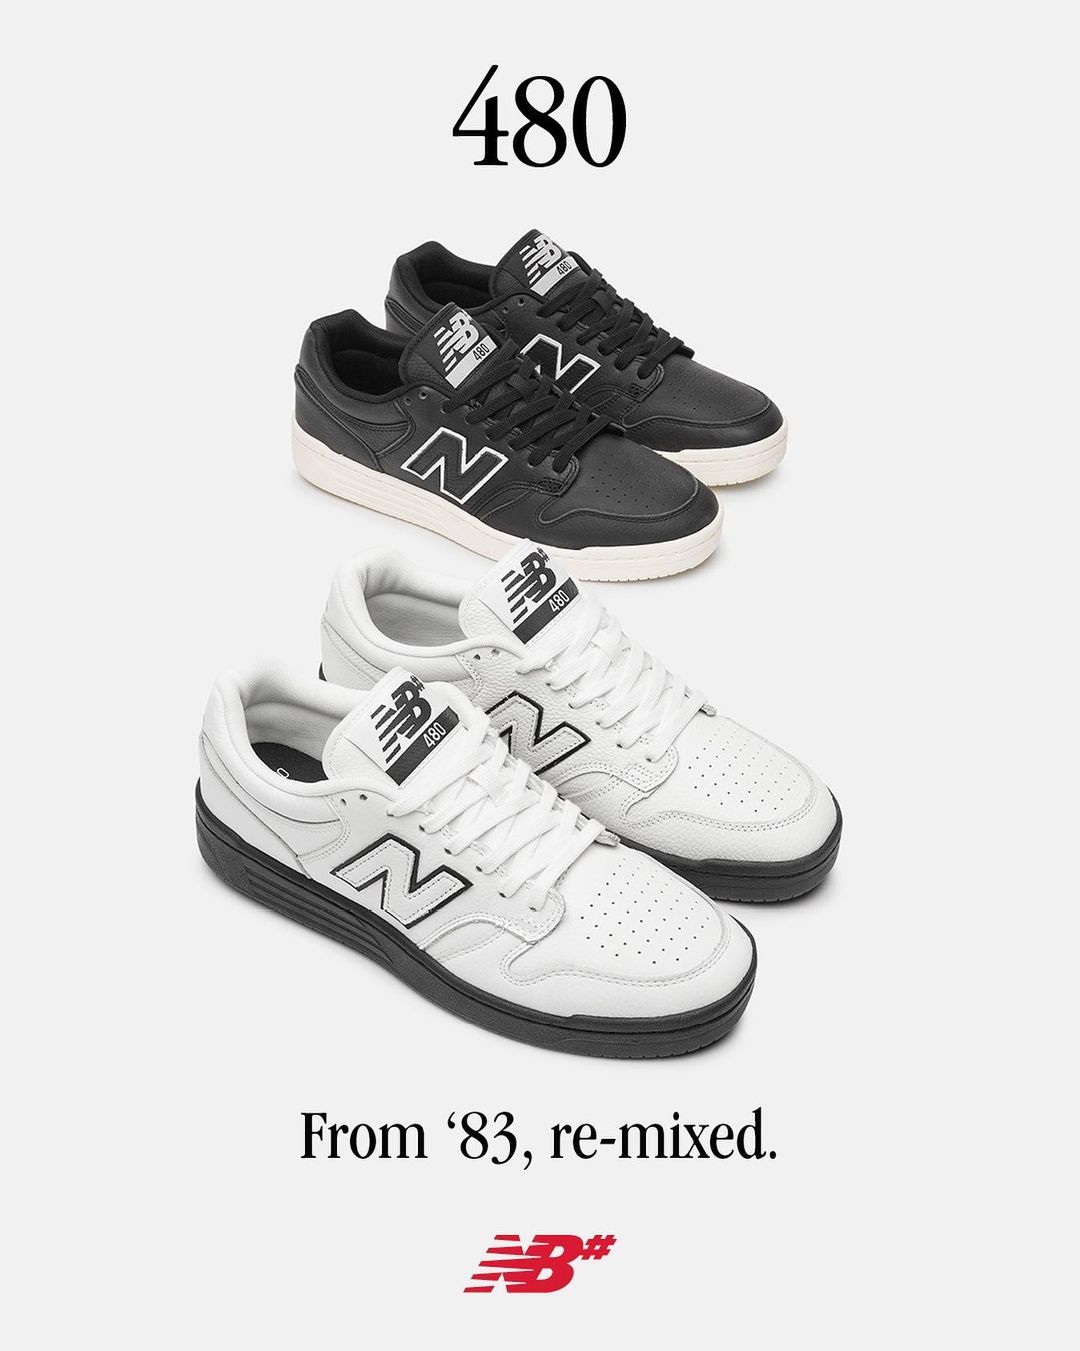 New Balance Numeric 480 Skate Shoe Yin and Yang Collection available now! - CSC, Cardiff Skateboard Club - UK Skate Store